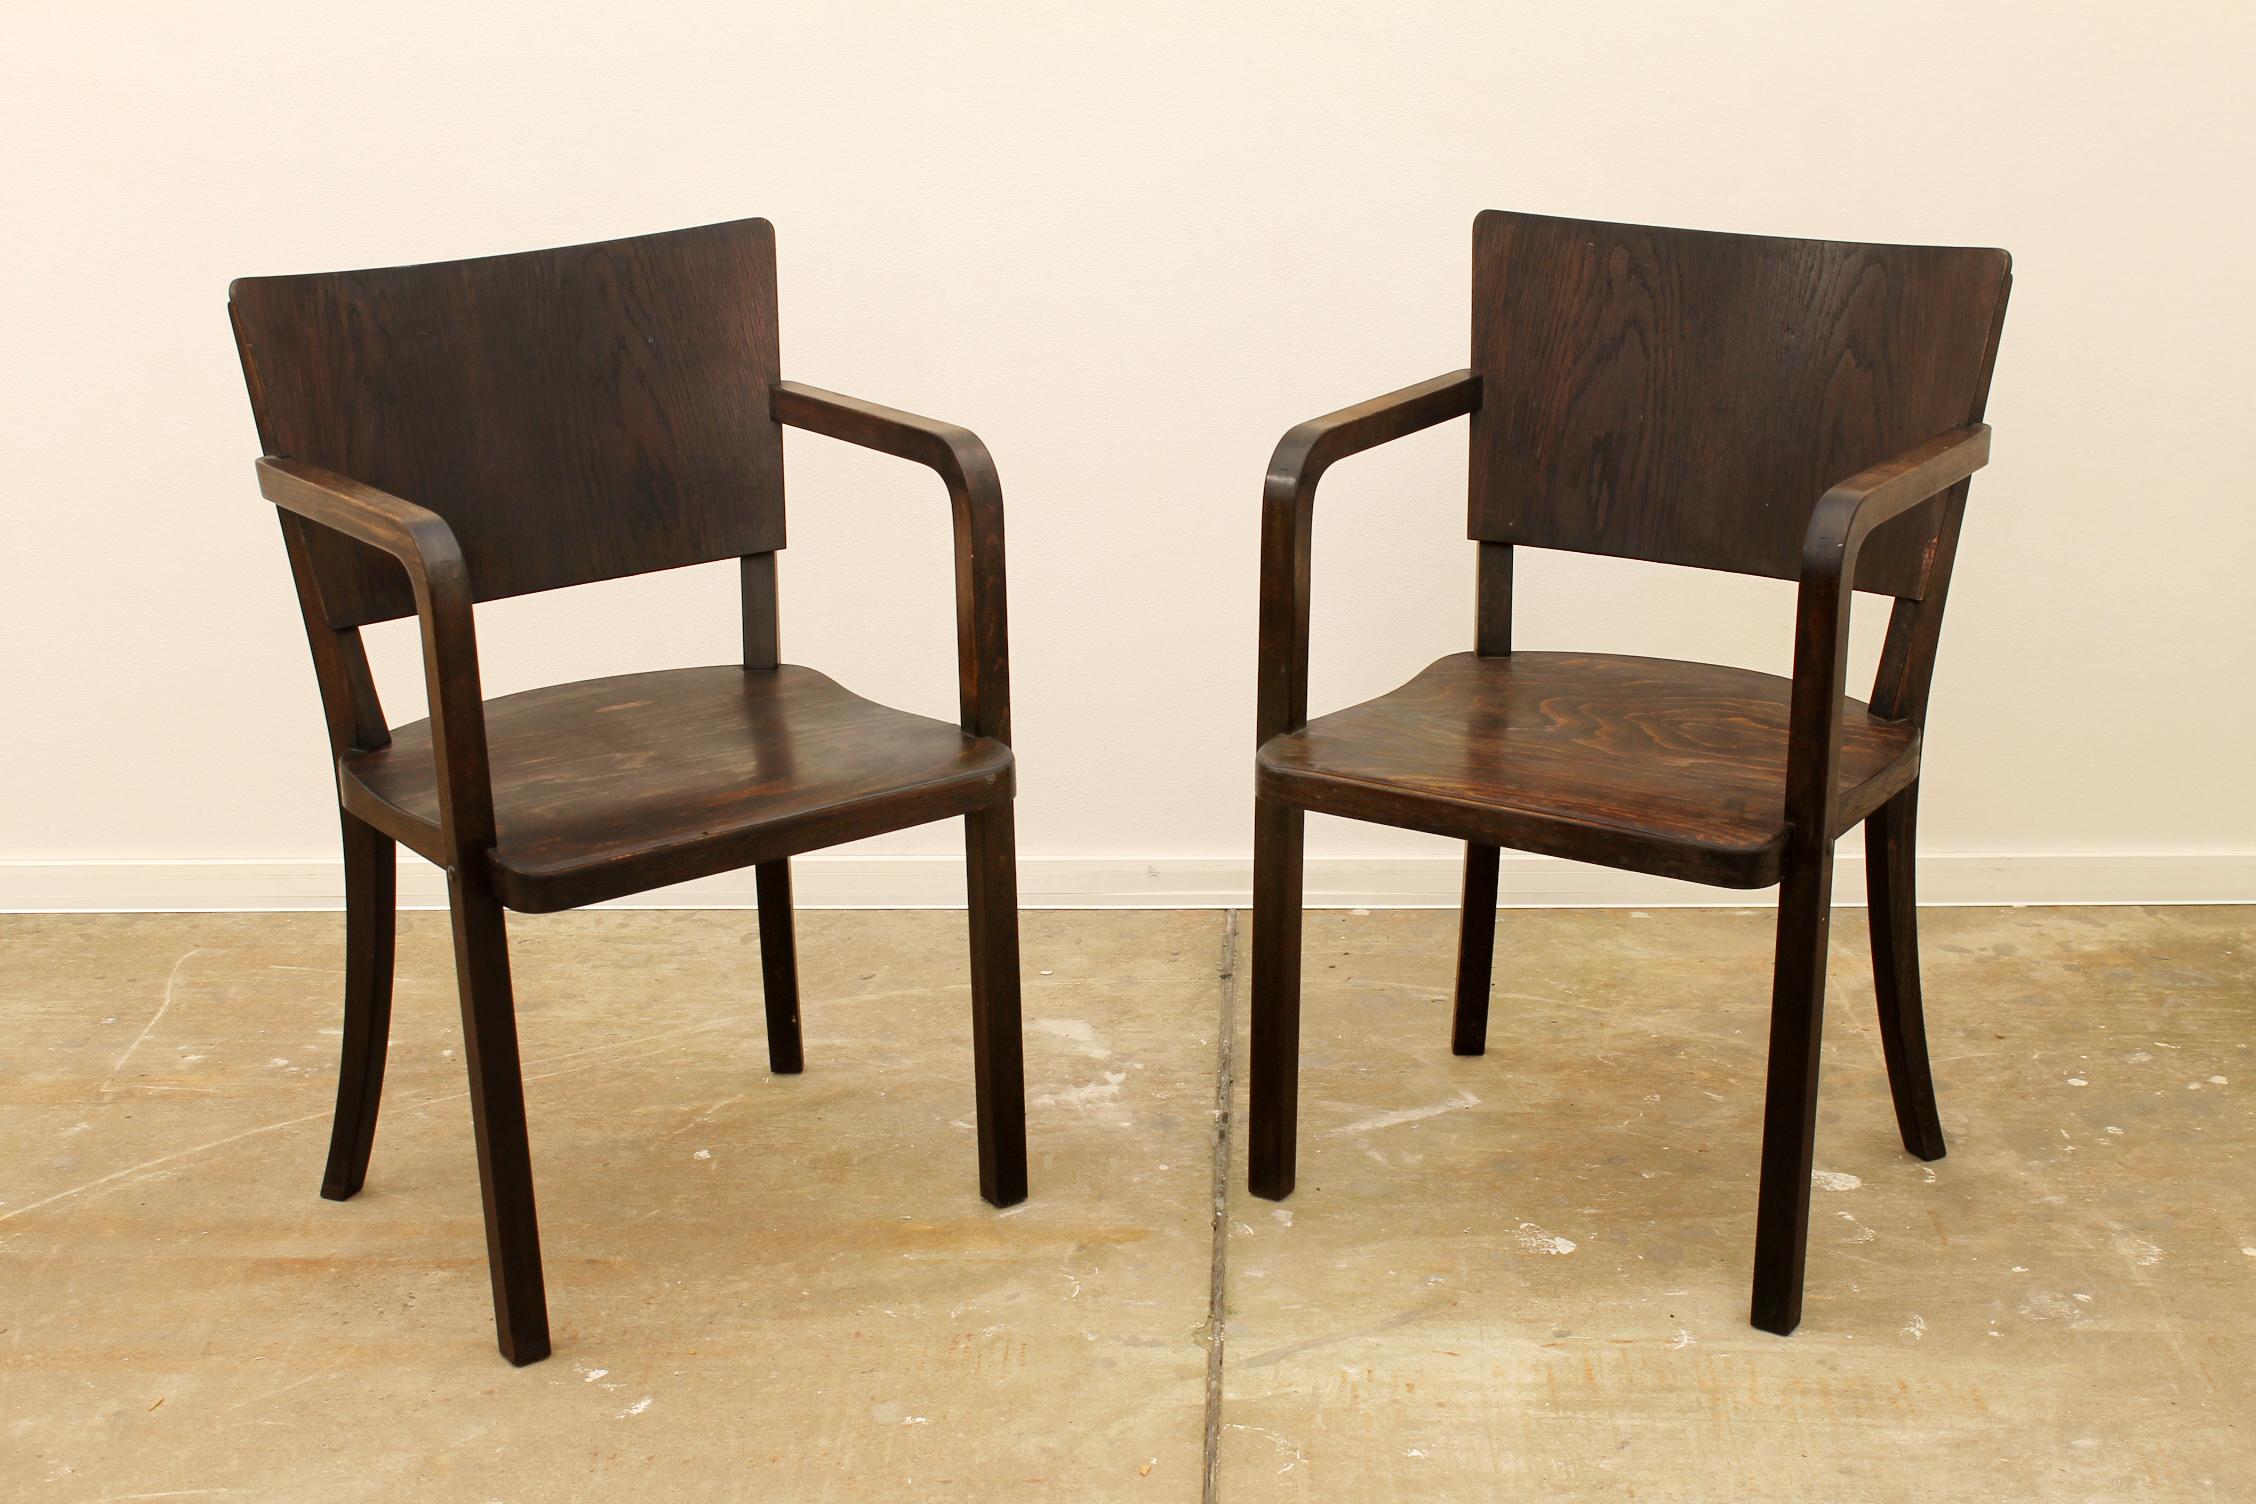 These armchairs were made in the former Czechoslovakia in the 1950´s.
Made of dark stained beechwood.
Can be used as office chairs or writing desk chairs.
They are in very good Vintage condition, showing slight signs of age and using.
Price is